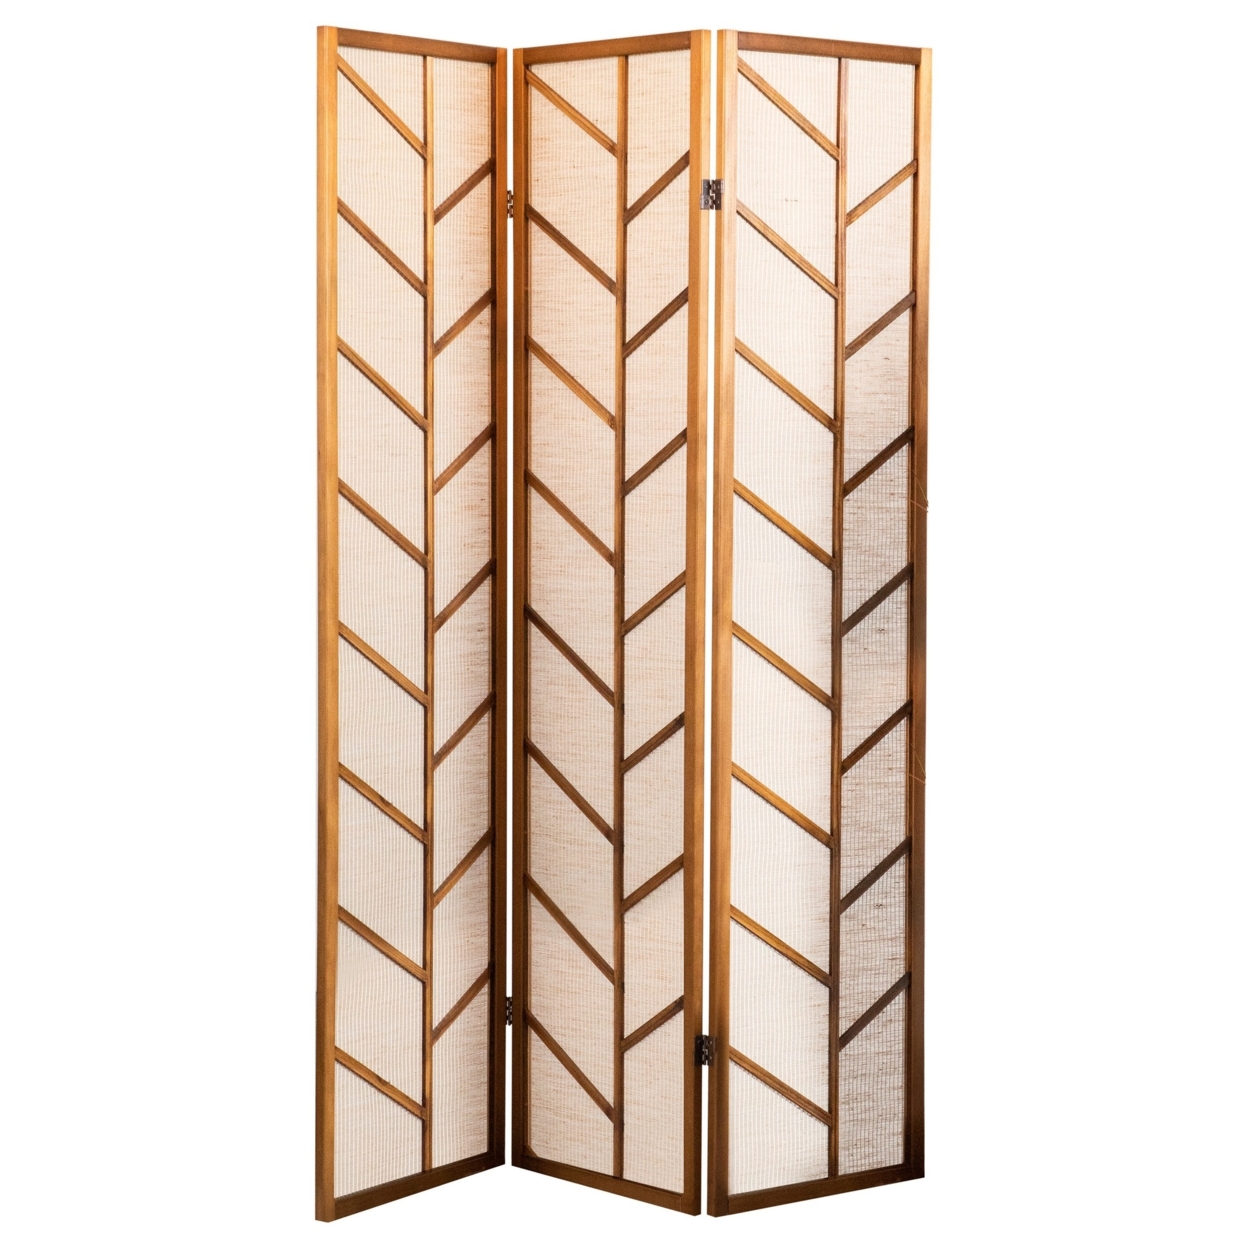 3 Panel Screen With Jute Linen Fabric And Wooden Frame, Brown And Beige- Saltoro Sherpi